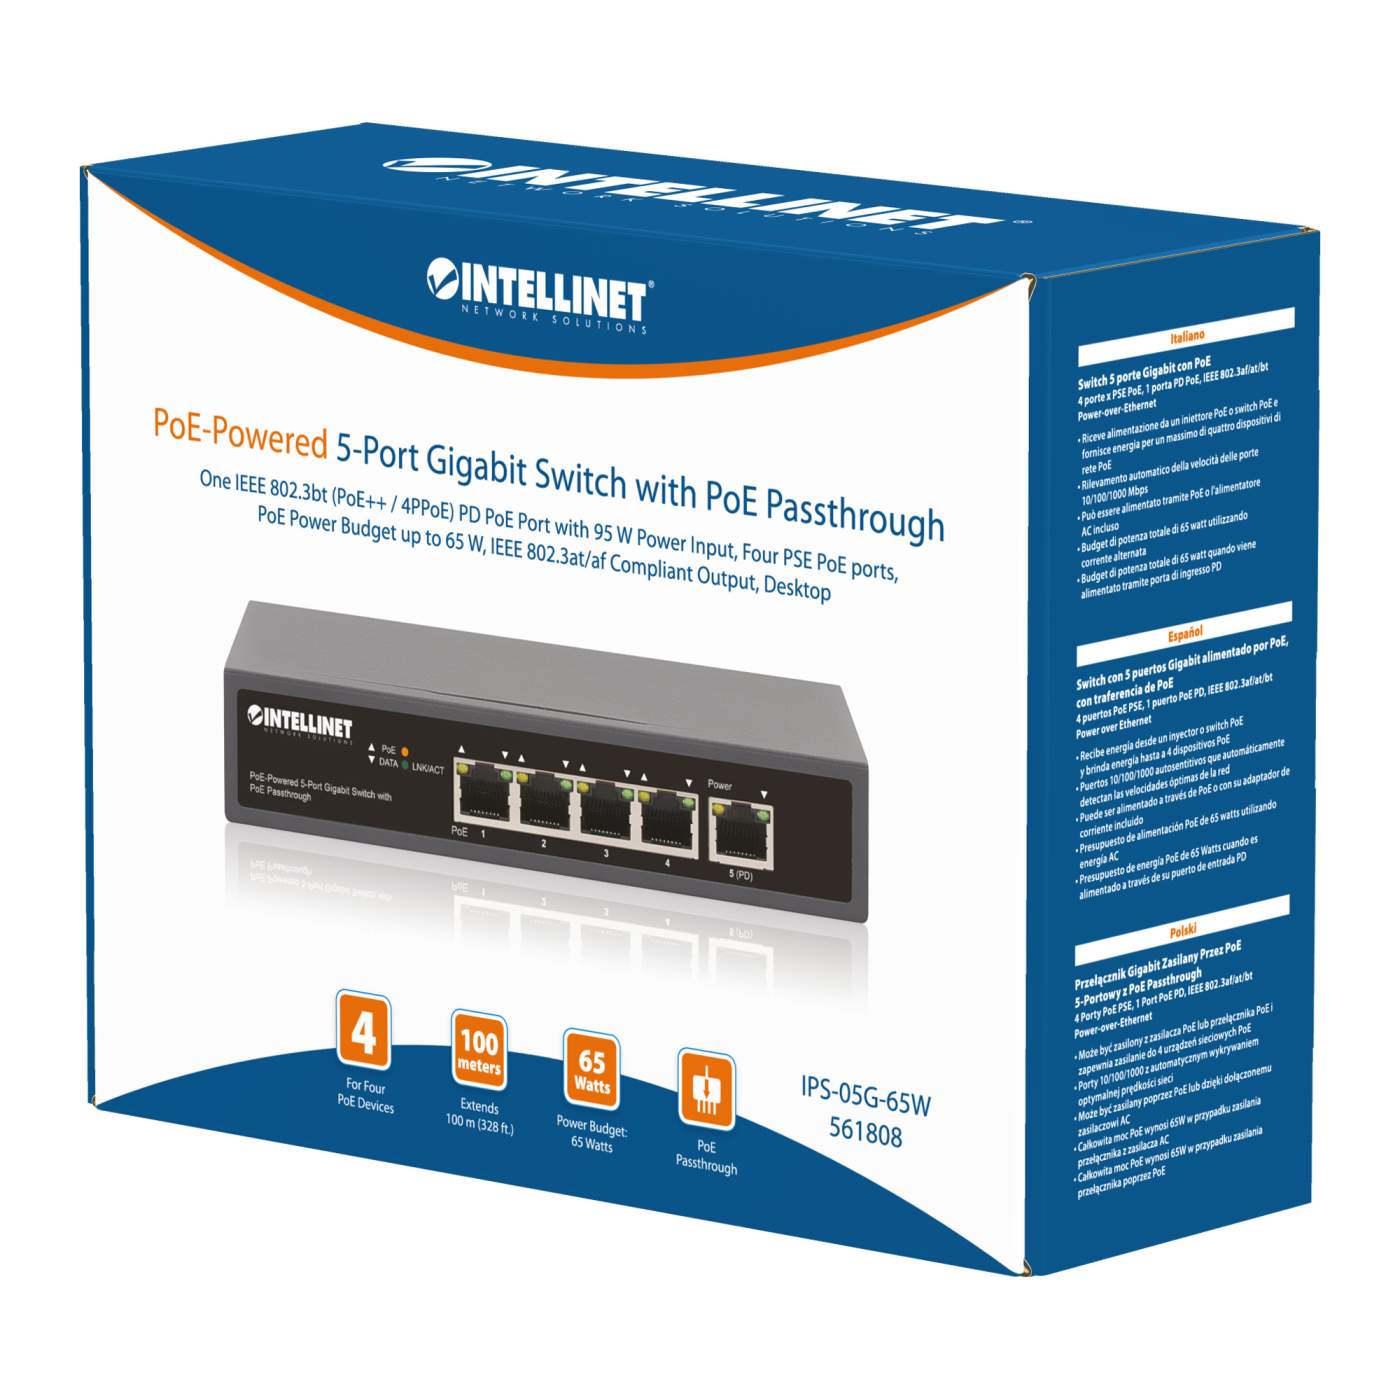 PoE-Powered 5-Port GbE Switch w/ PoE Passthrough (561808